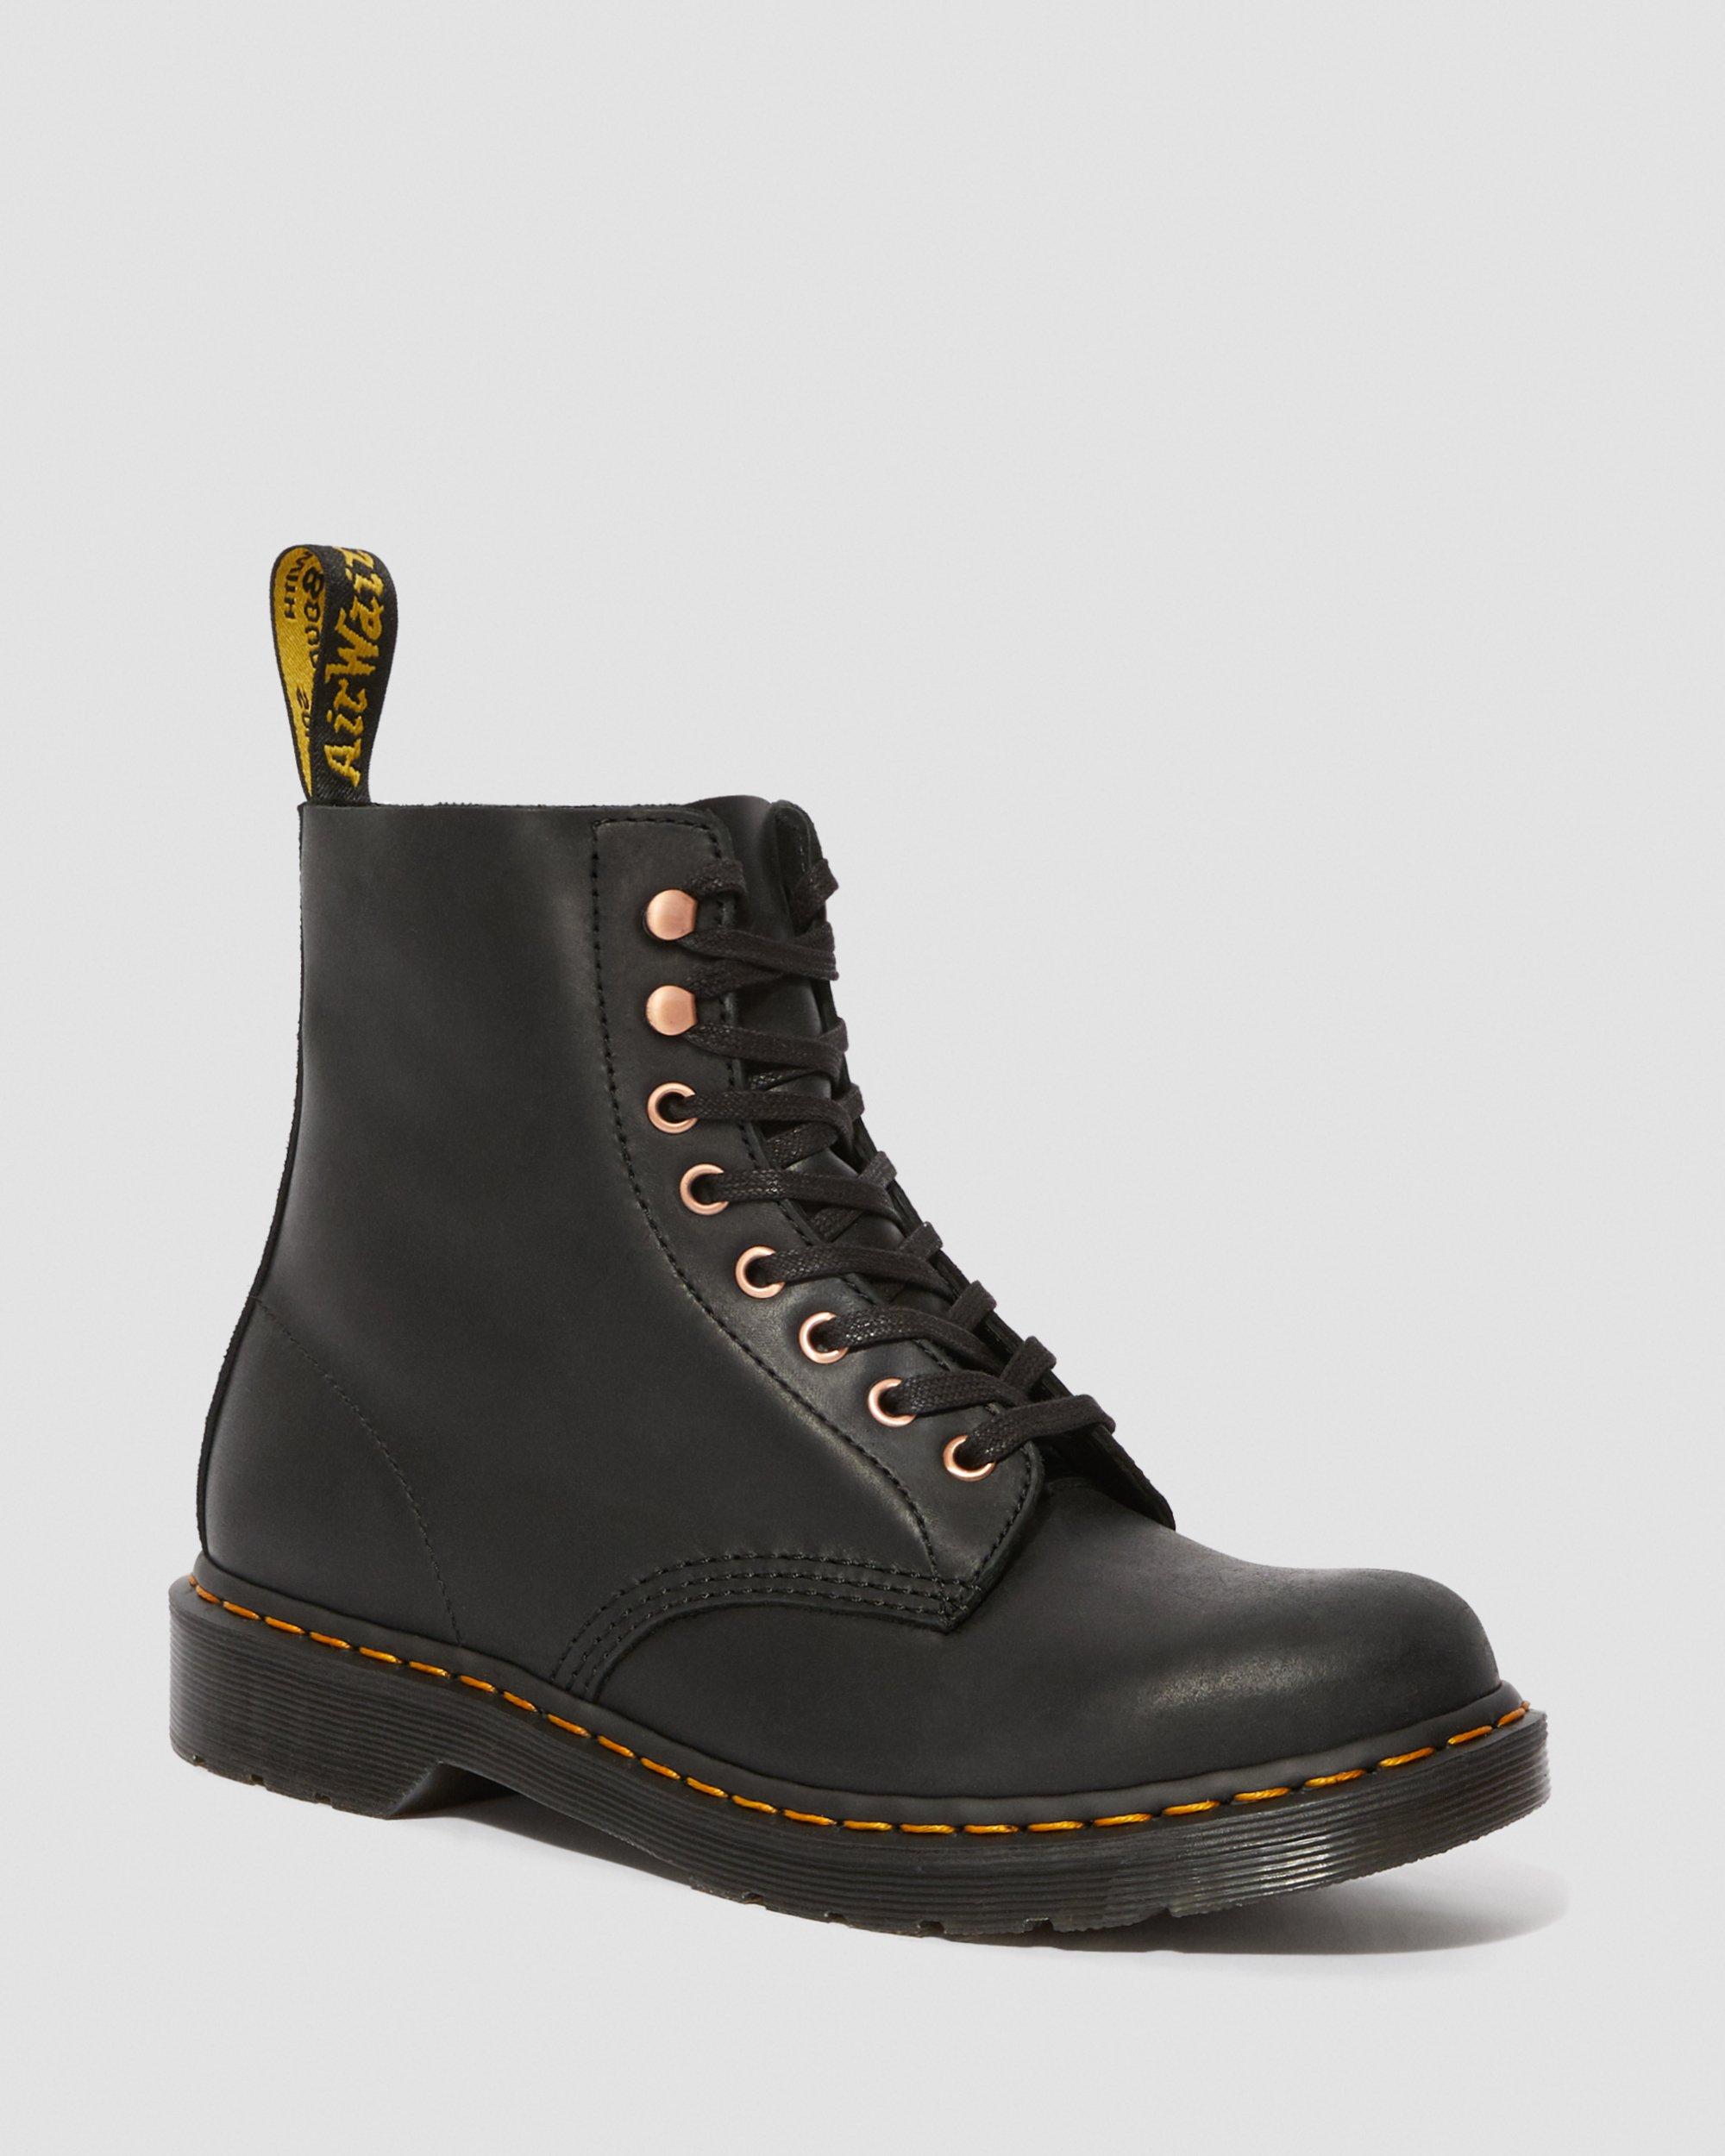 1460 Pascal Soap Stone in Black | Dr. Martens